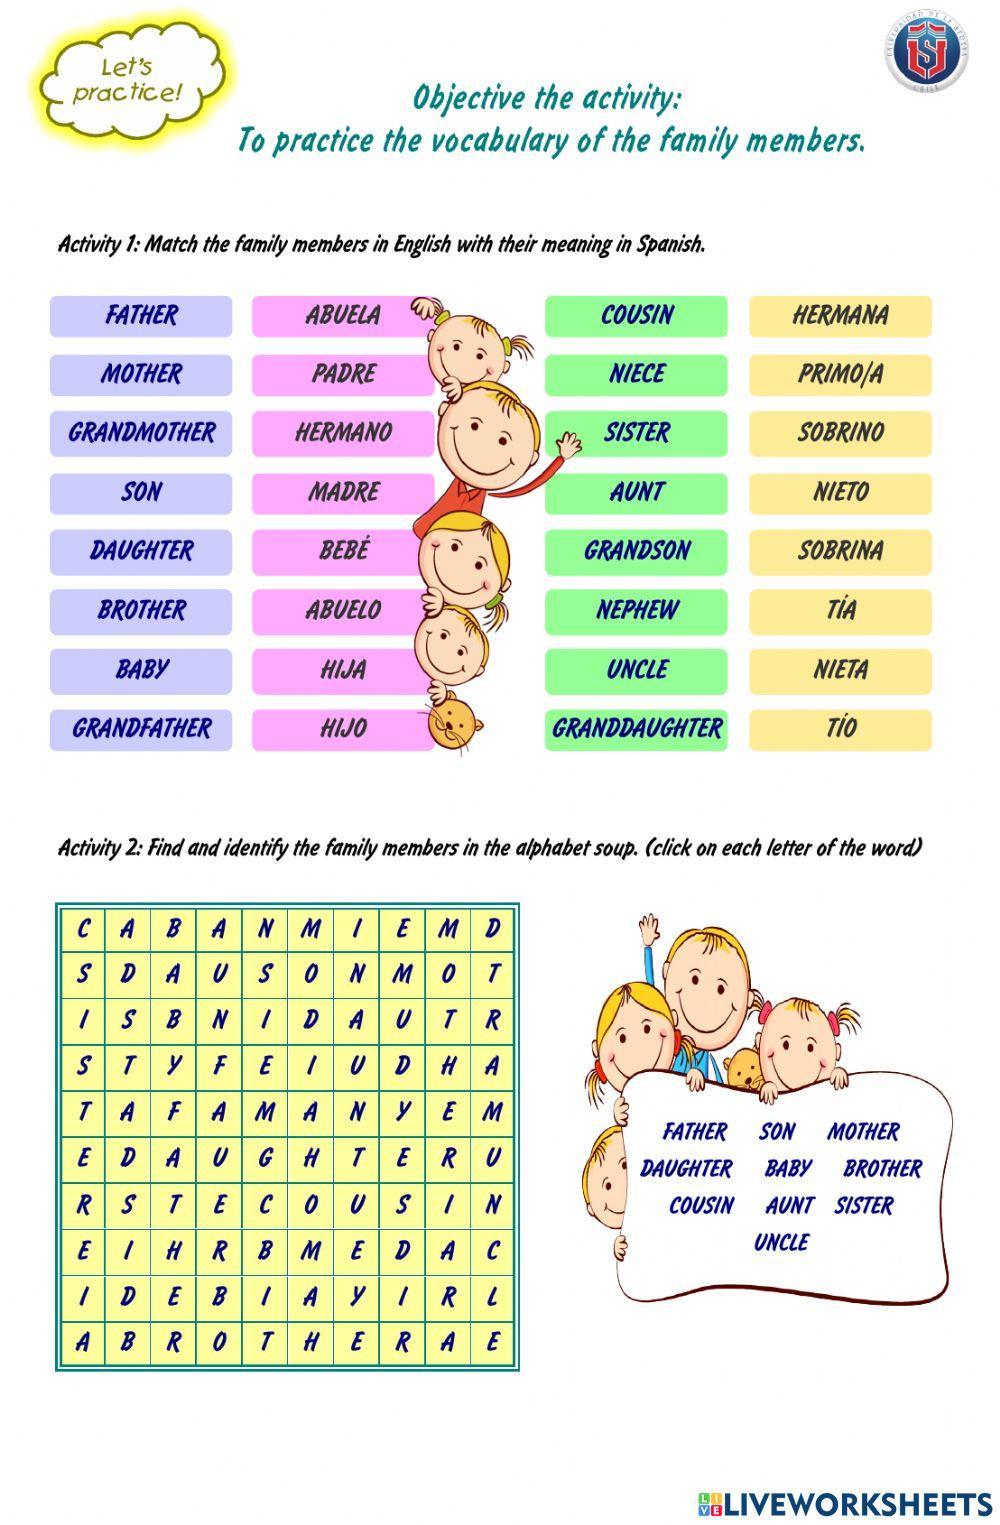 Let's practice! Family member vocabulary